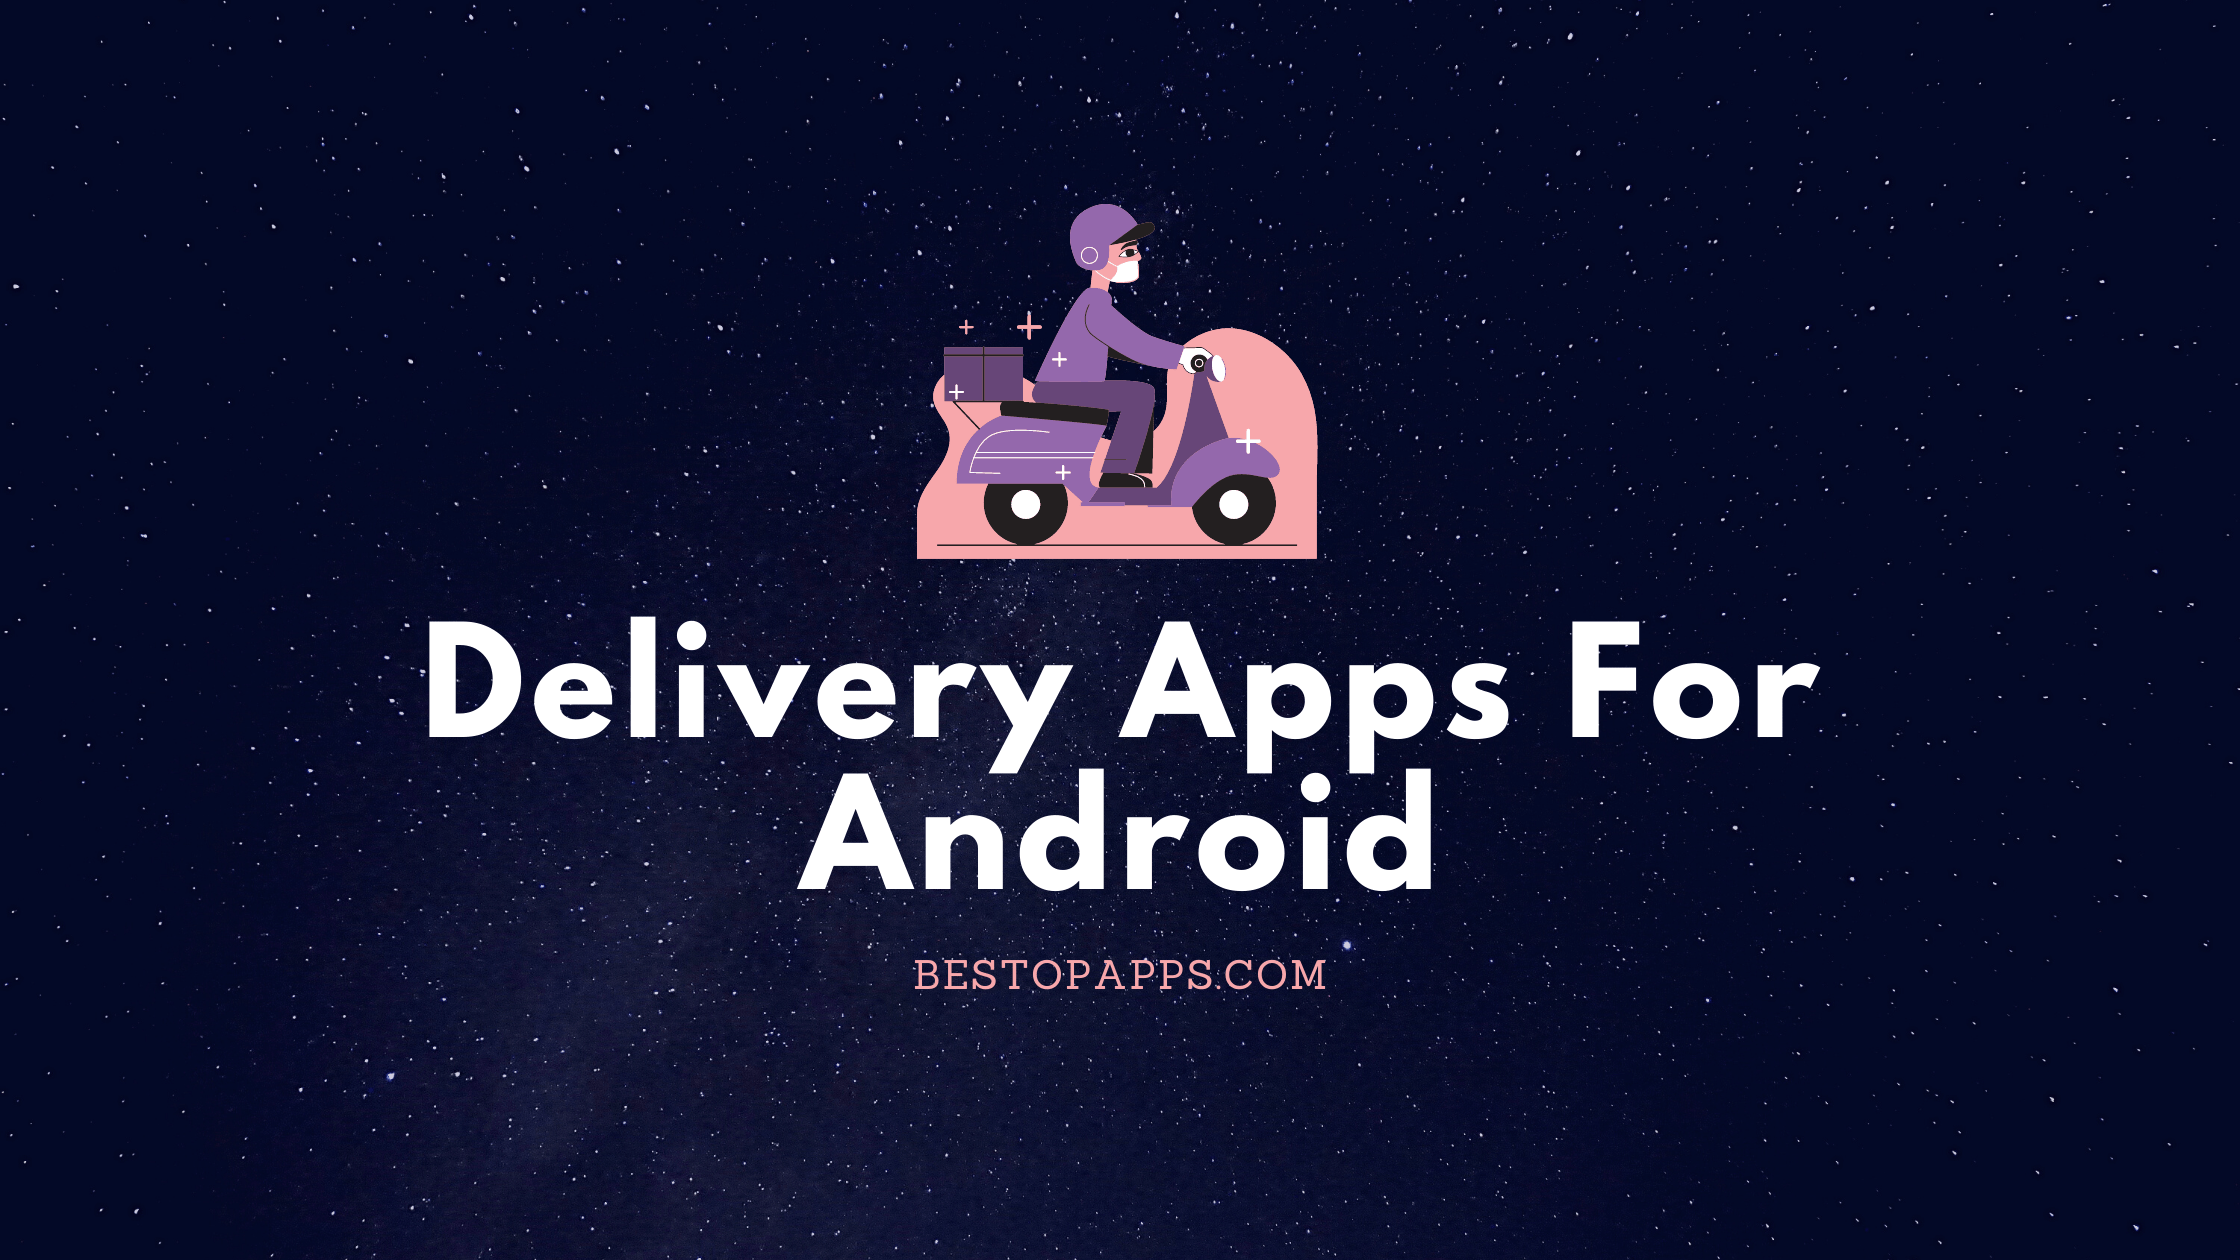 Delivery Apps For Android